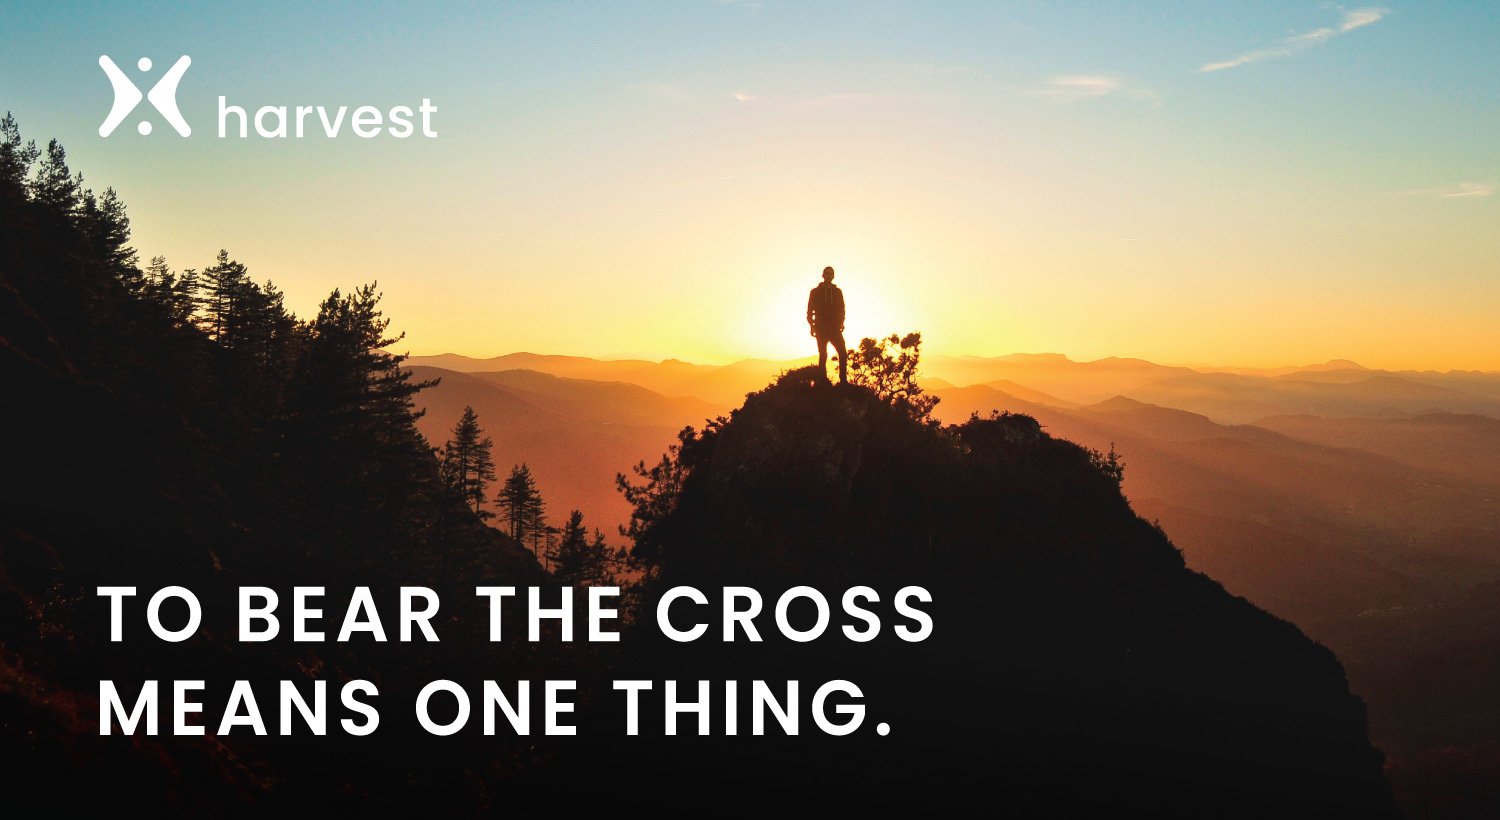 To bear the cross means one thing.